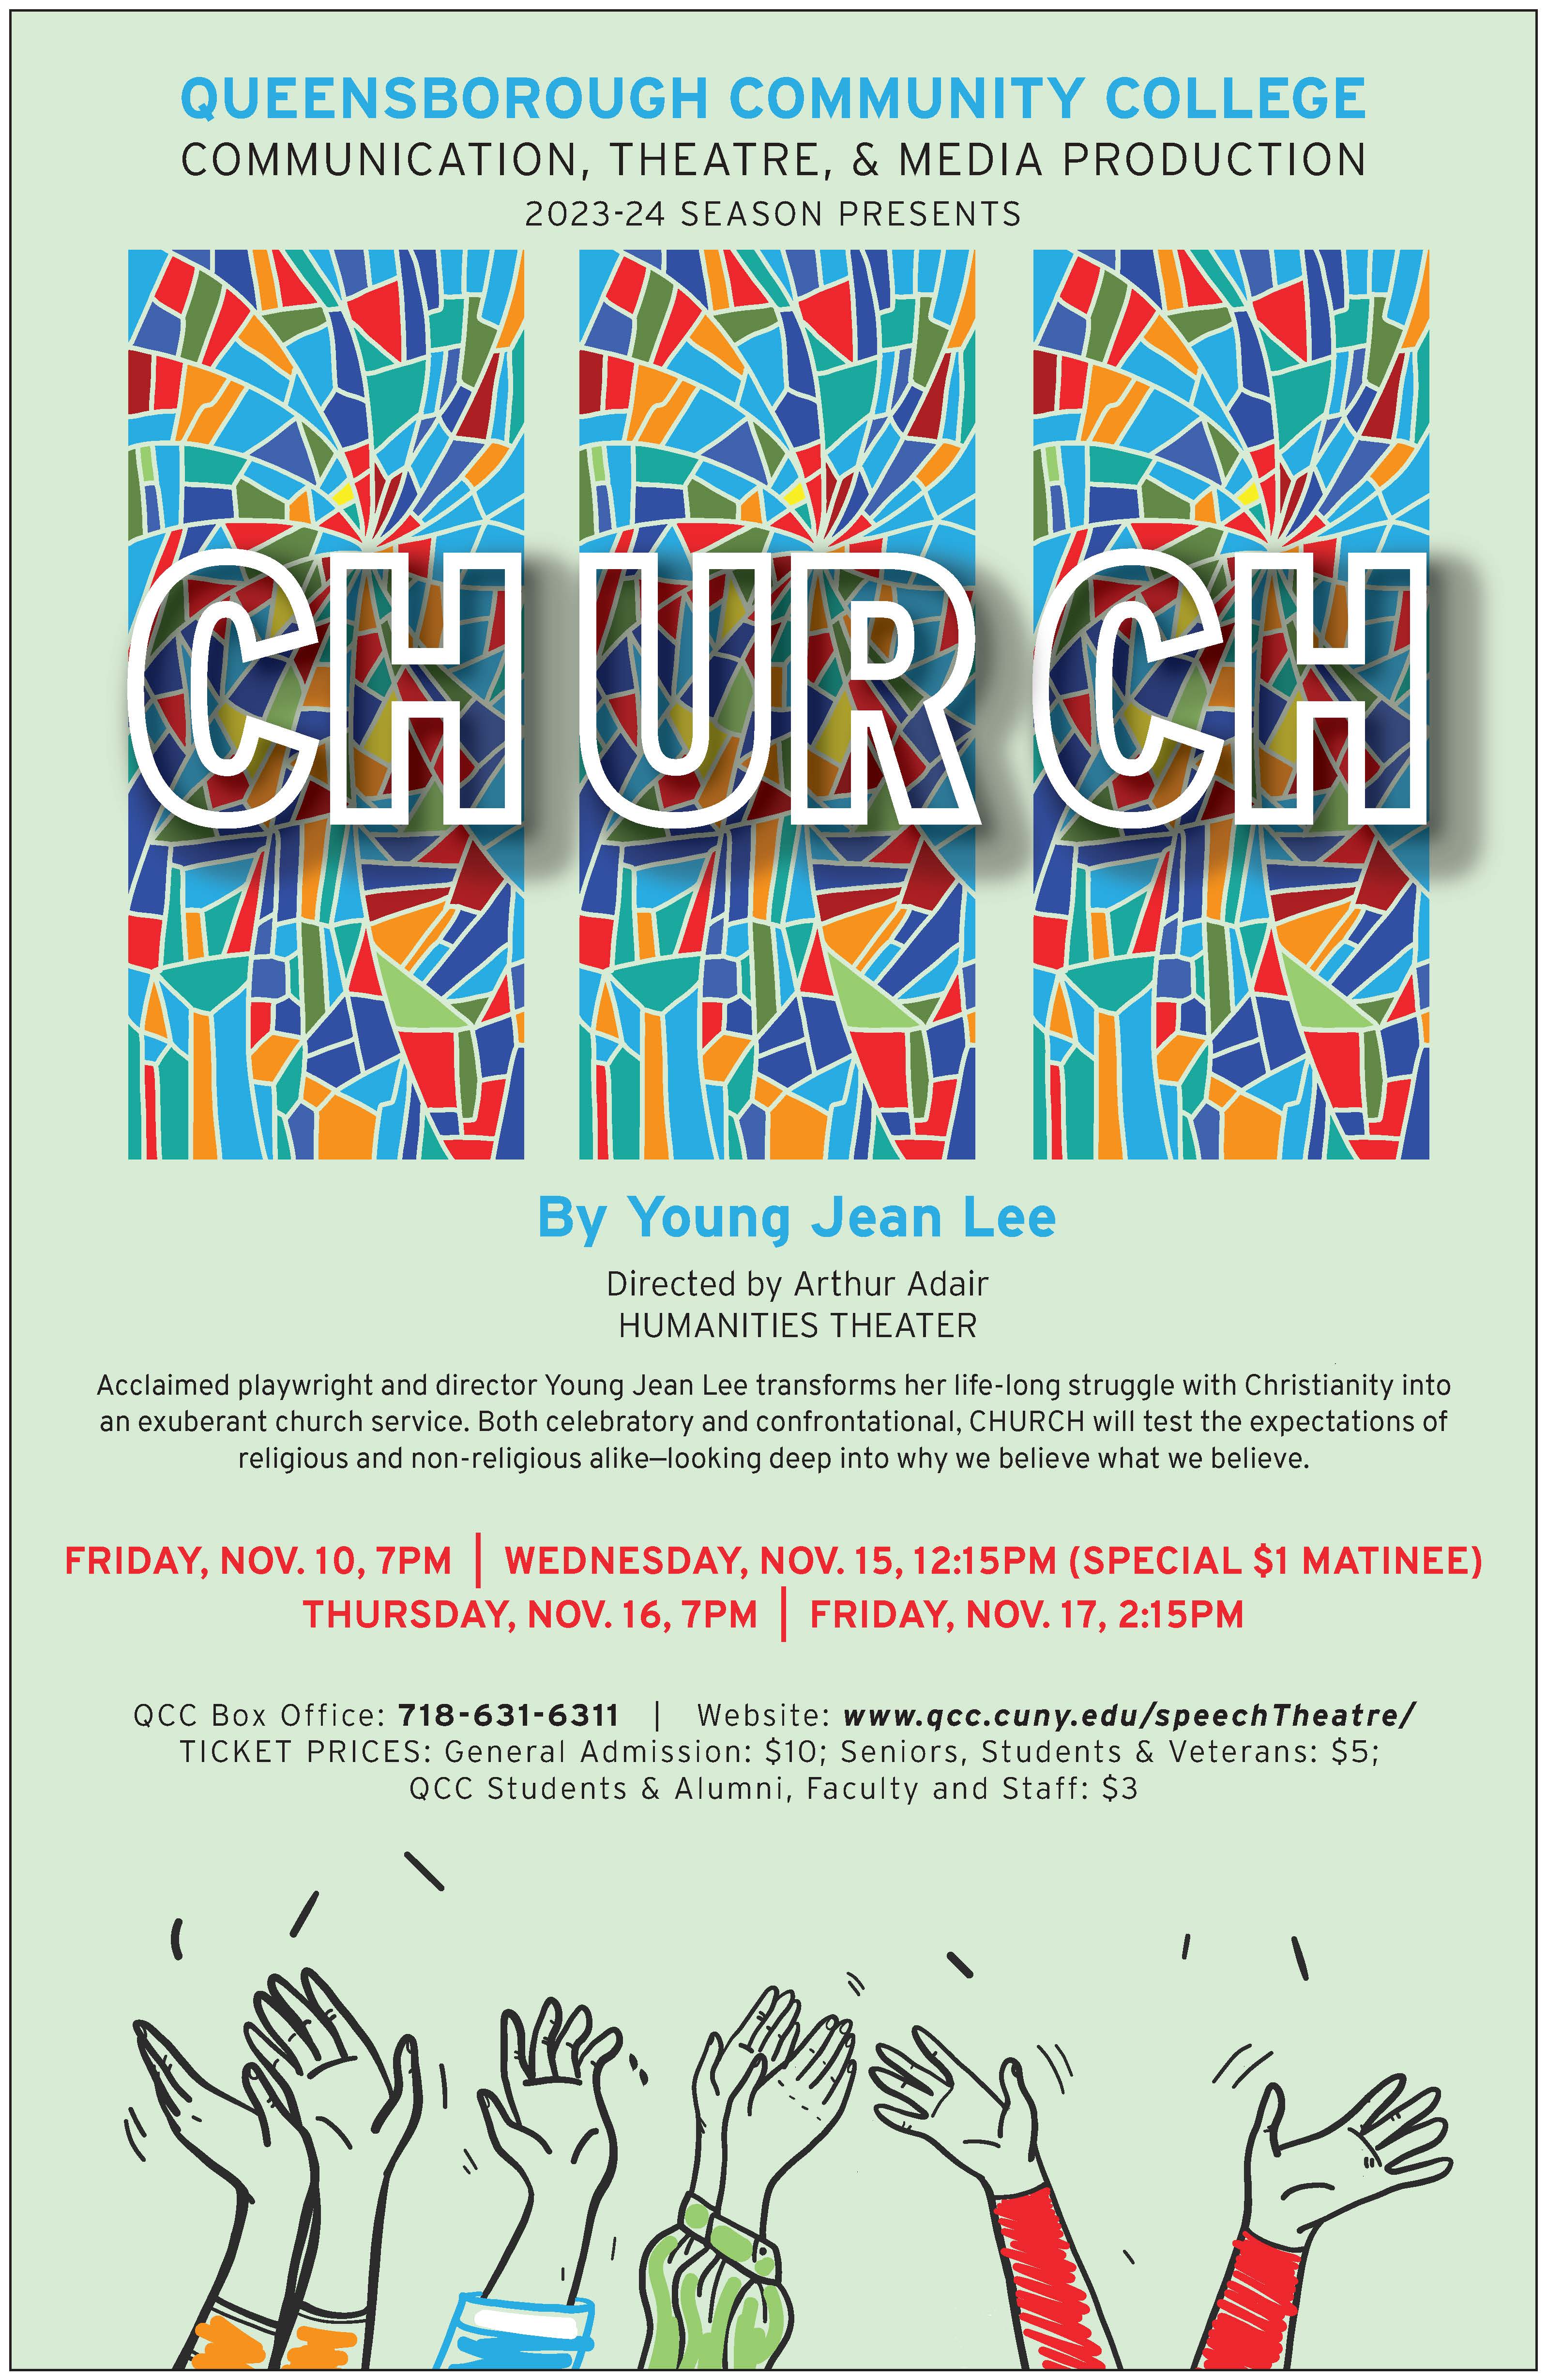 This is a poster for the fall 2023 production of ‘Church’ by Young Jean Lee and Directed by Professor Arthur Adair. The poster displays three pairs of hands reaching up to three stained glass windows with the words church etched into them.